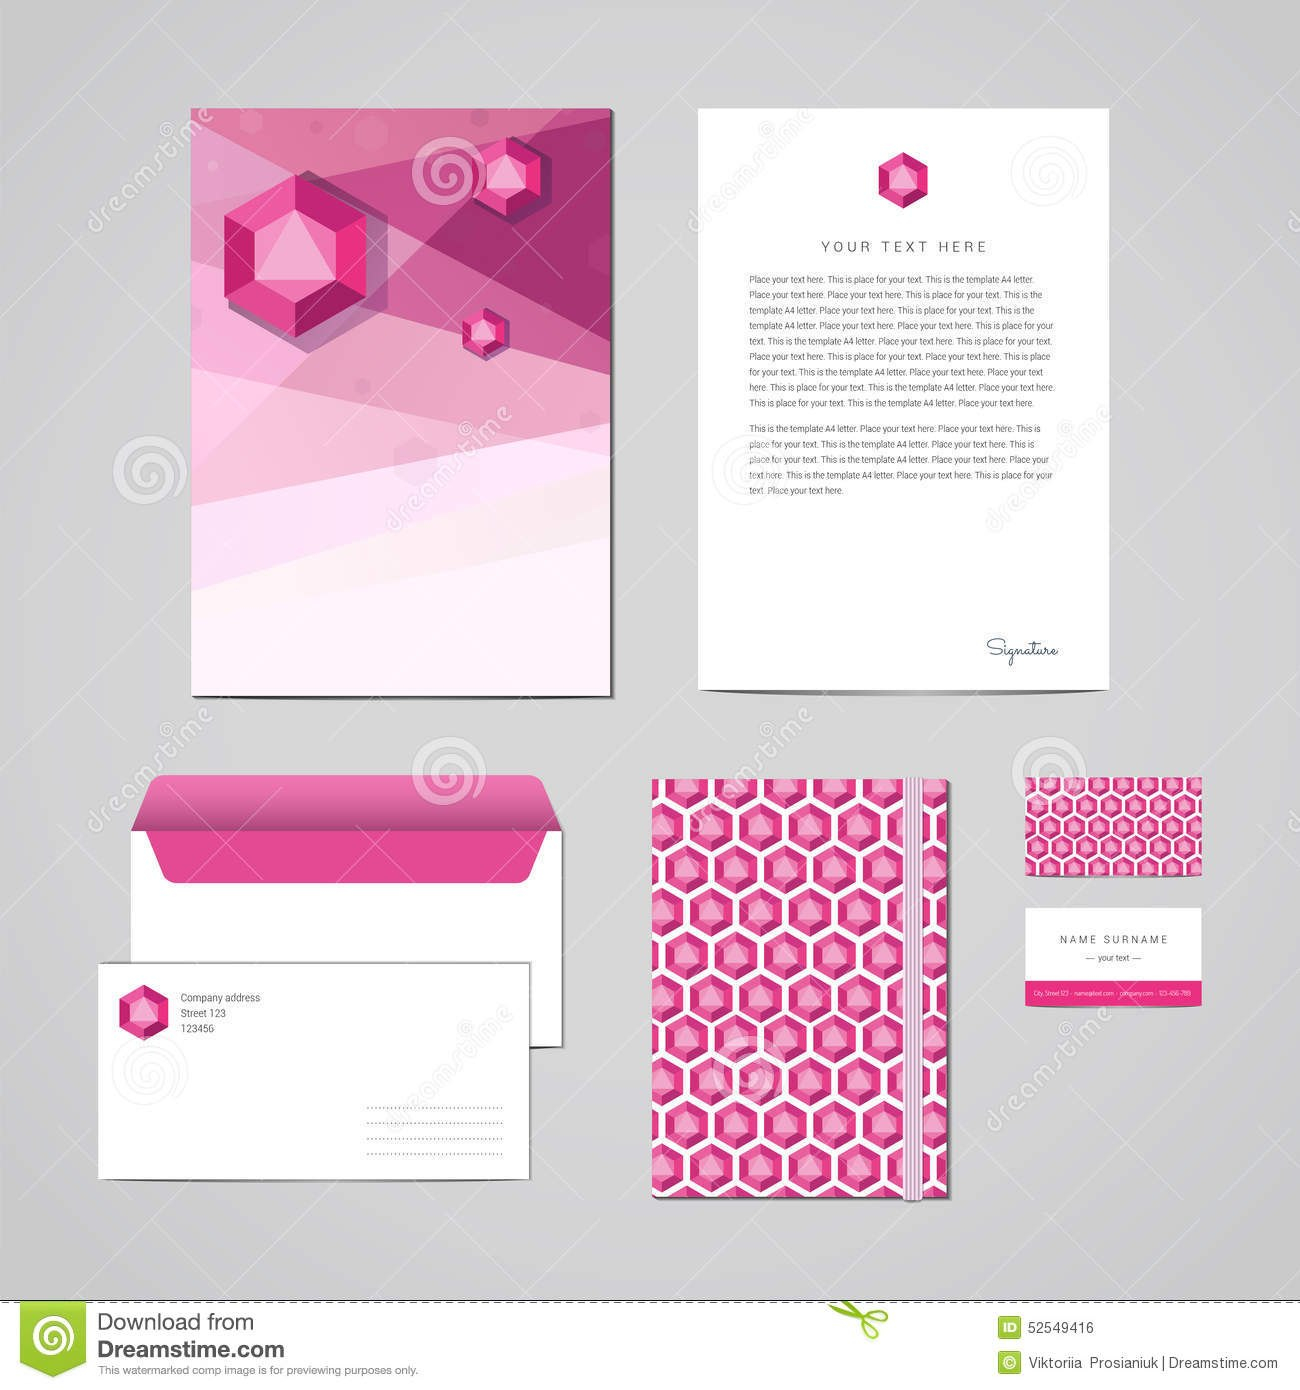 Corporate Identity Design Template Documentation For Business in Business Card Letterhead Envelope Template